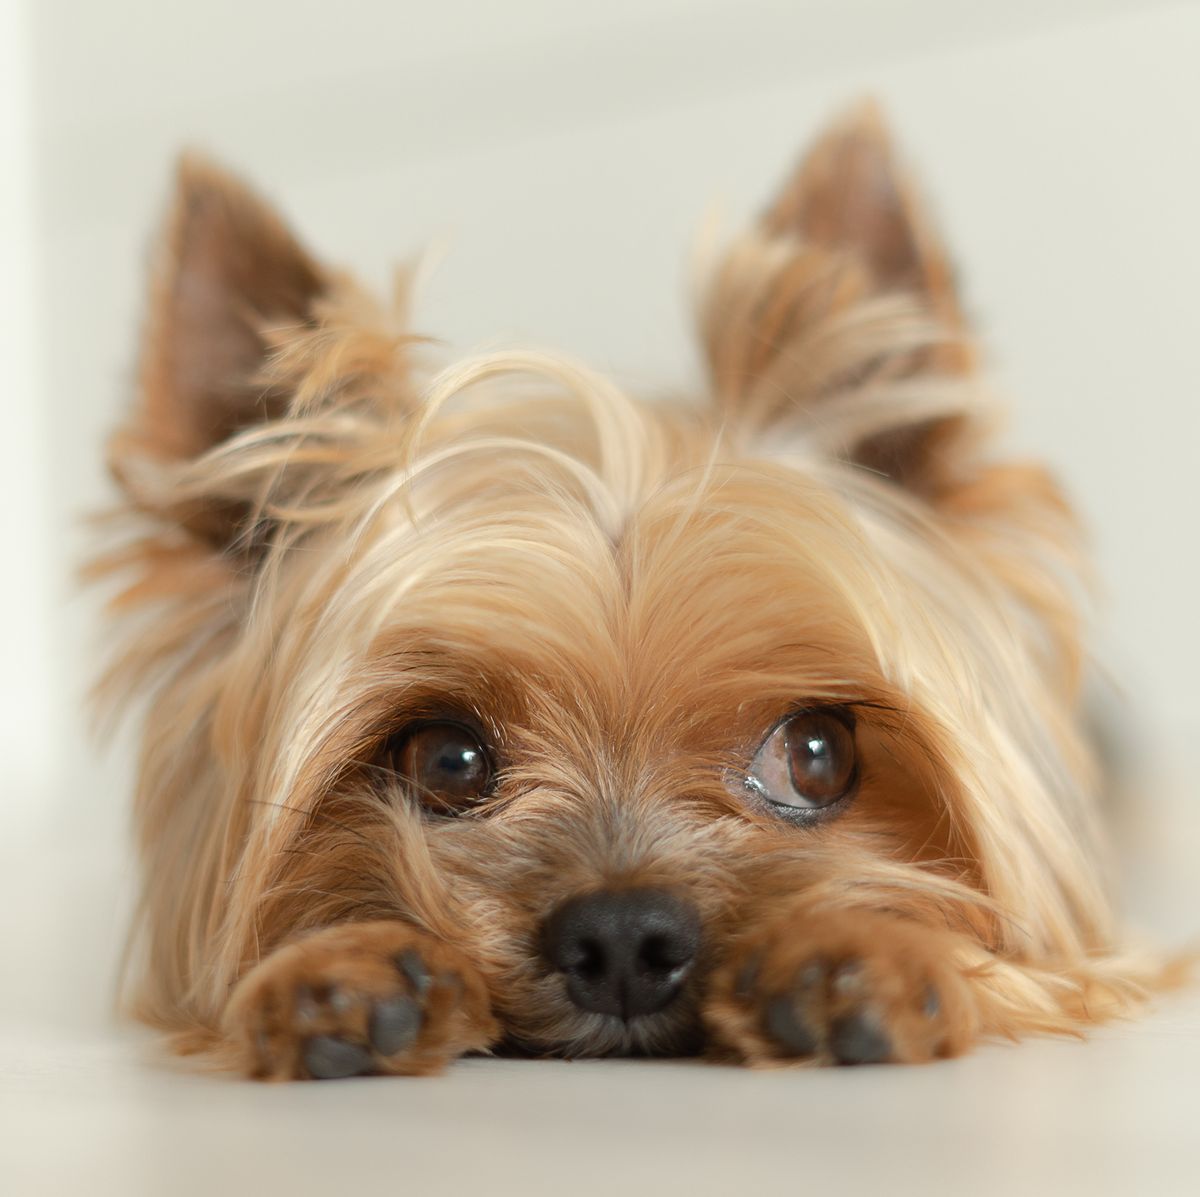 https://hips.hearstapps.com/hmg-prod/images/dog-yorkshire-terrier-lies-on-the-floor-with-paws-royalty-free-image-1682539706.jpg?crop=0.668xw:1.00xh;0.179xw,0&resize=1200:*